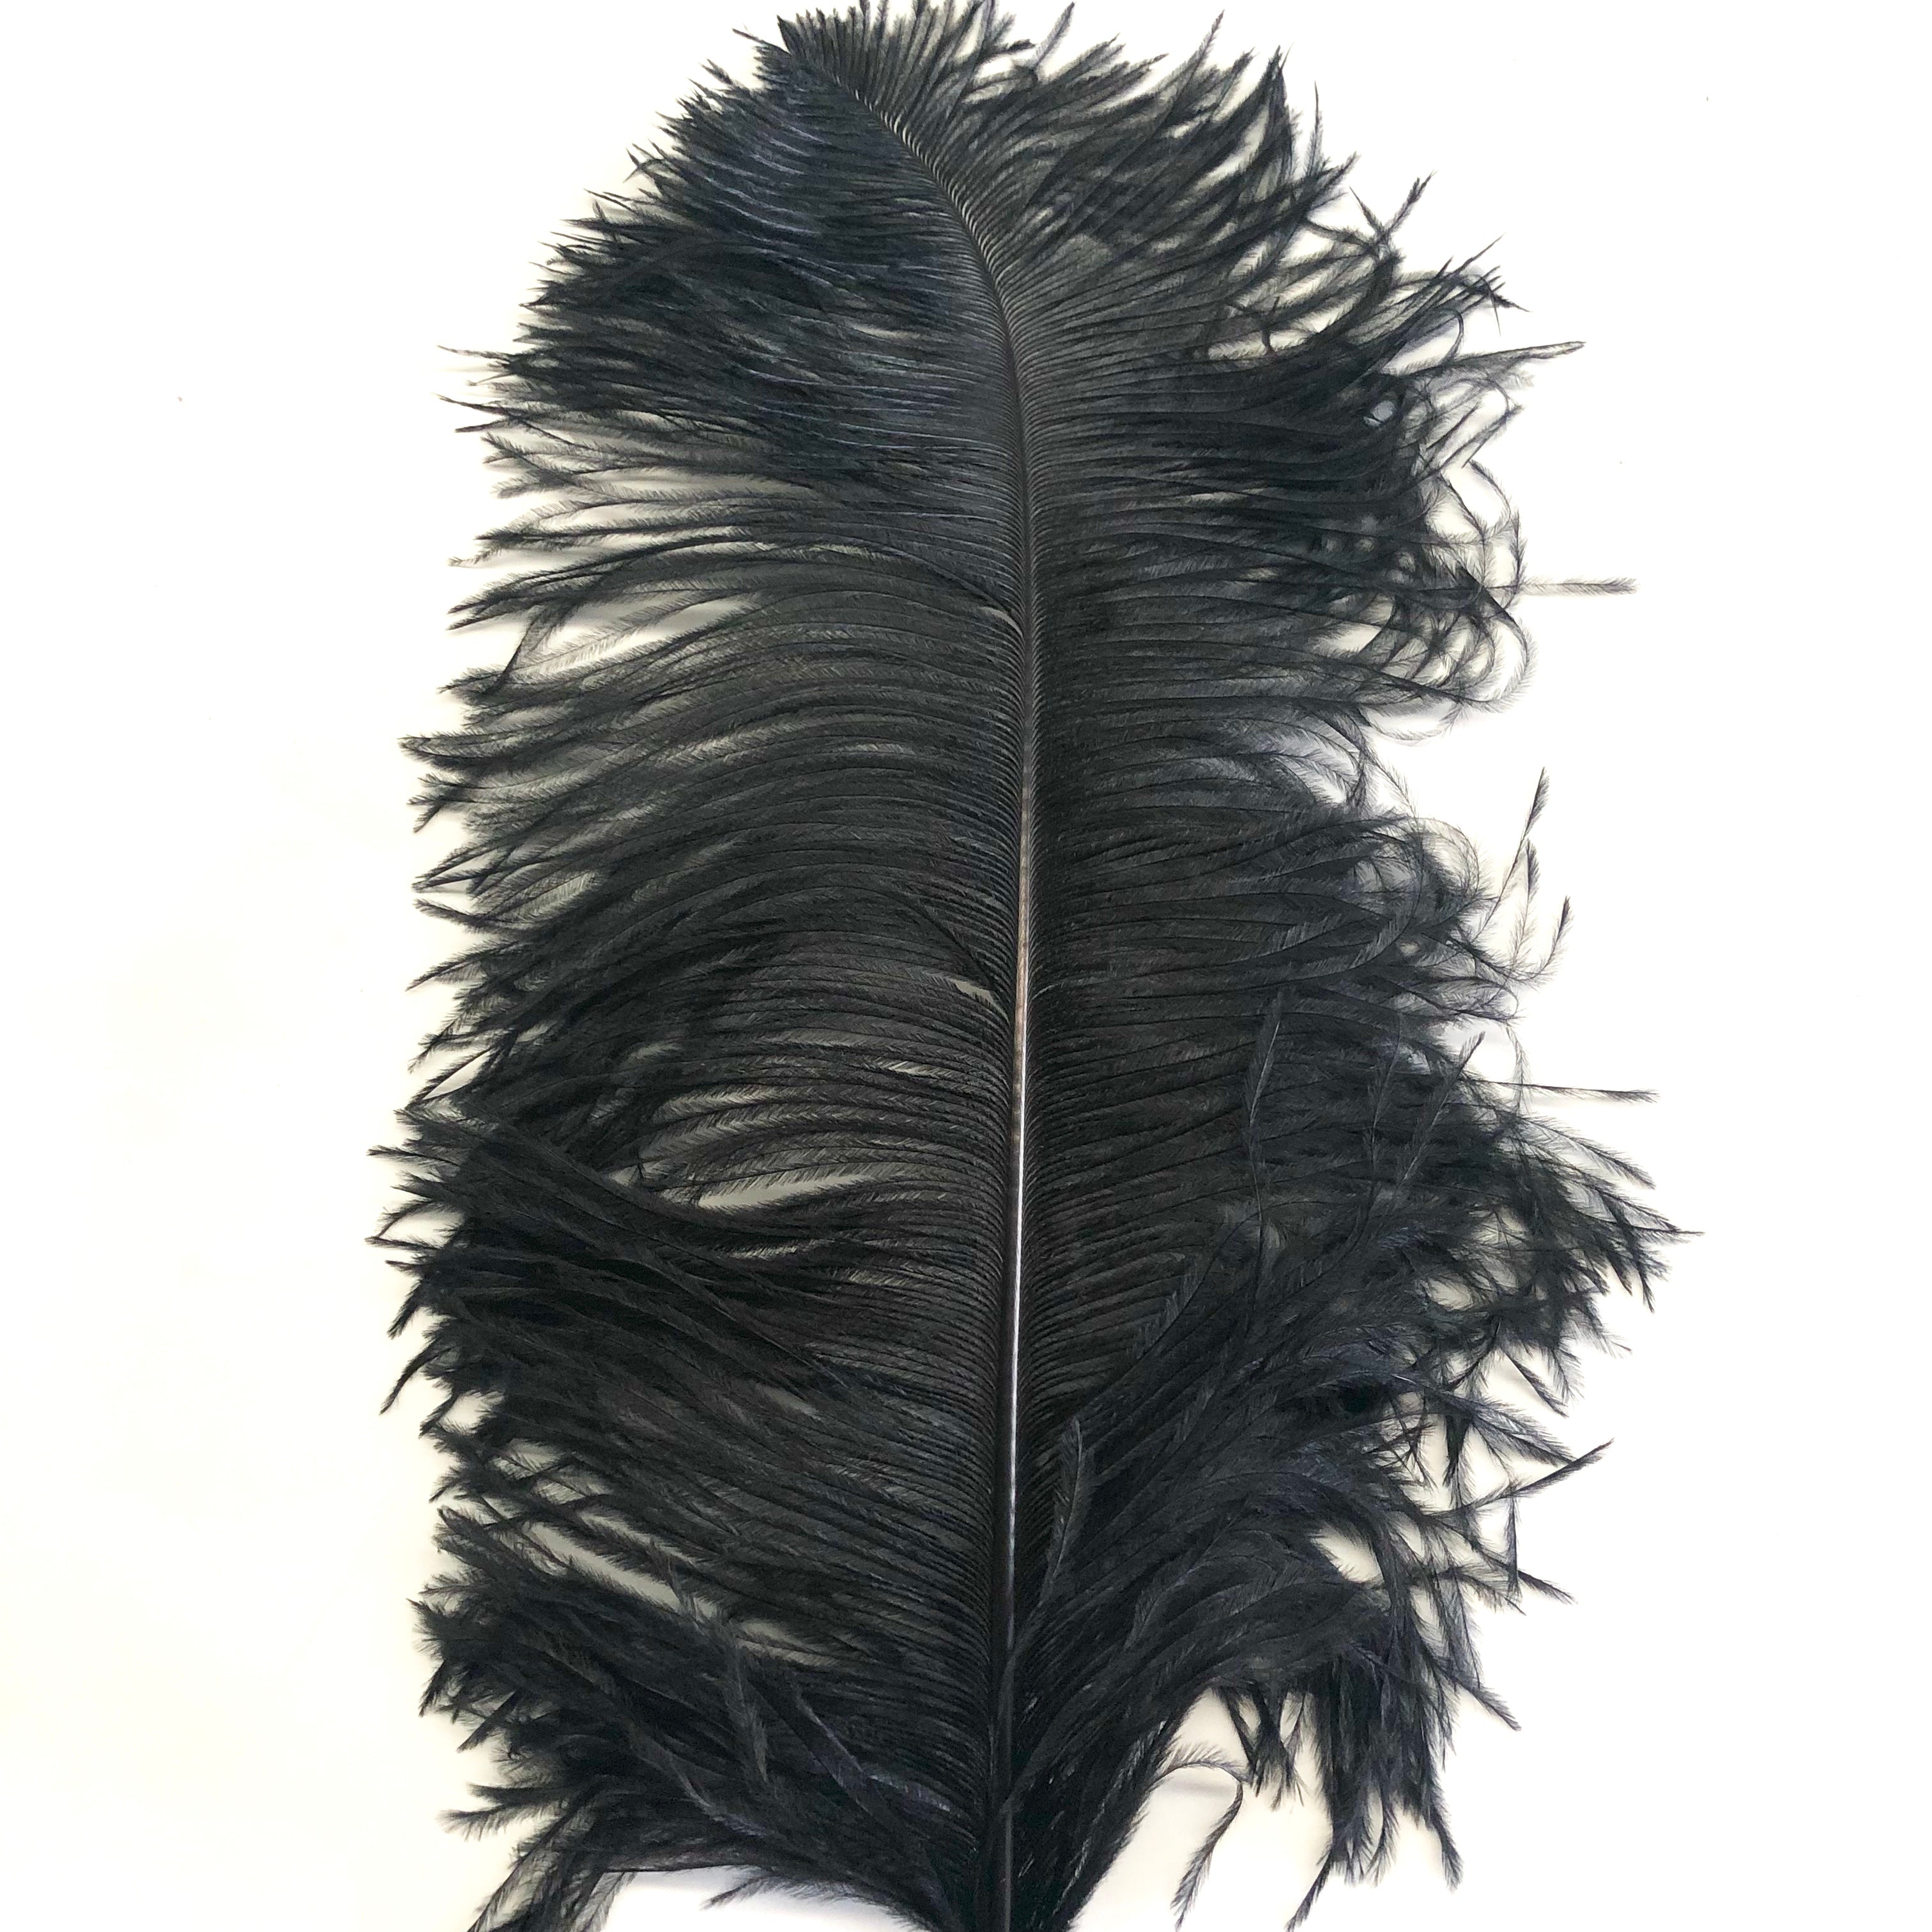 Ostrich Wing Feather Plumes 50-55cm (20-22") - Black ((SECONDS))